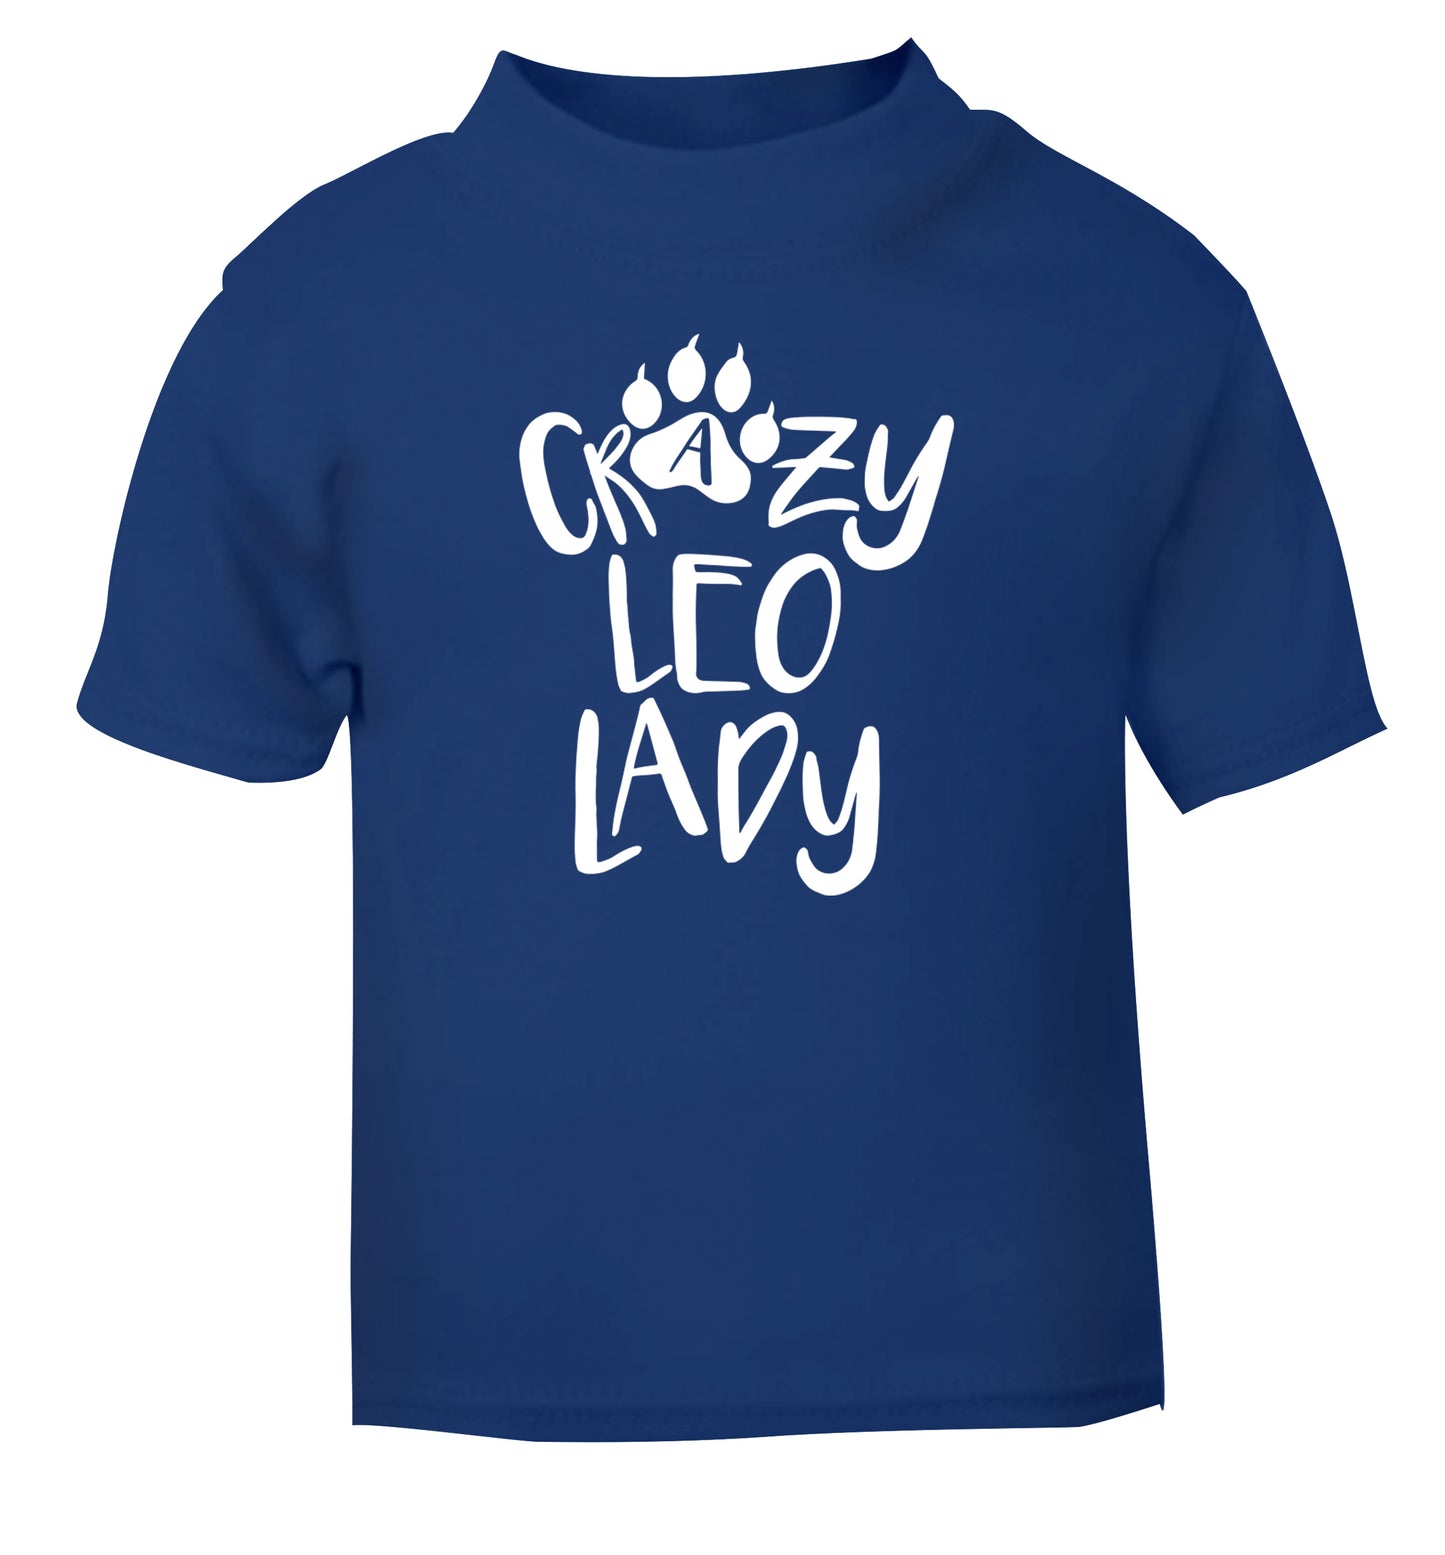 Crazy leo lady blue Baby Toddler Tshirt 2 Years